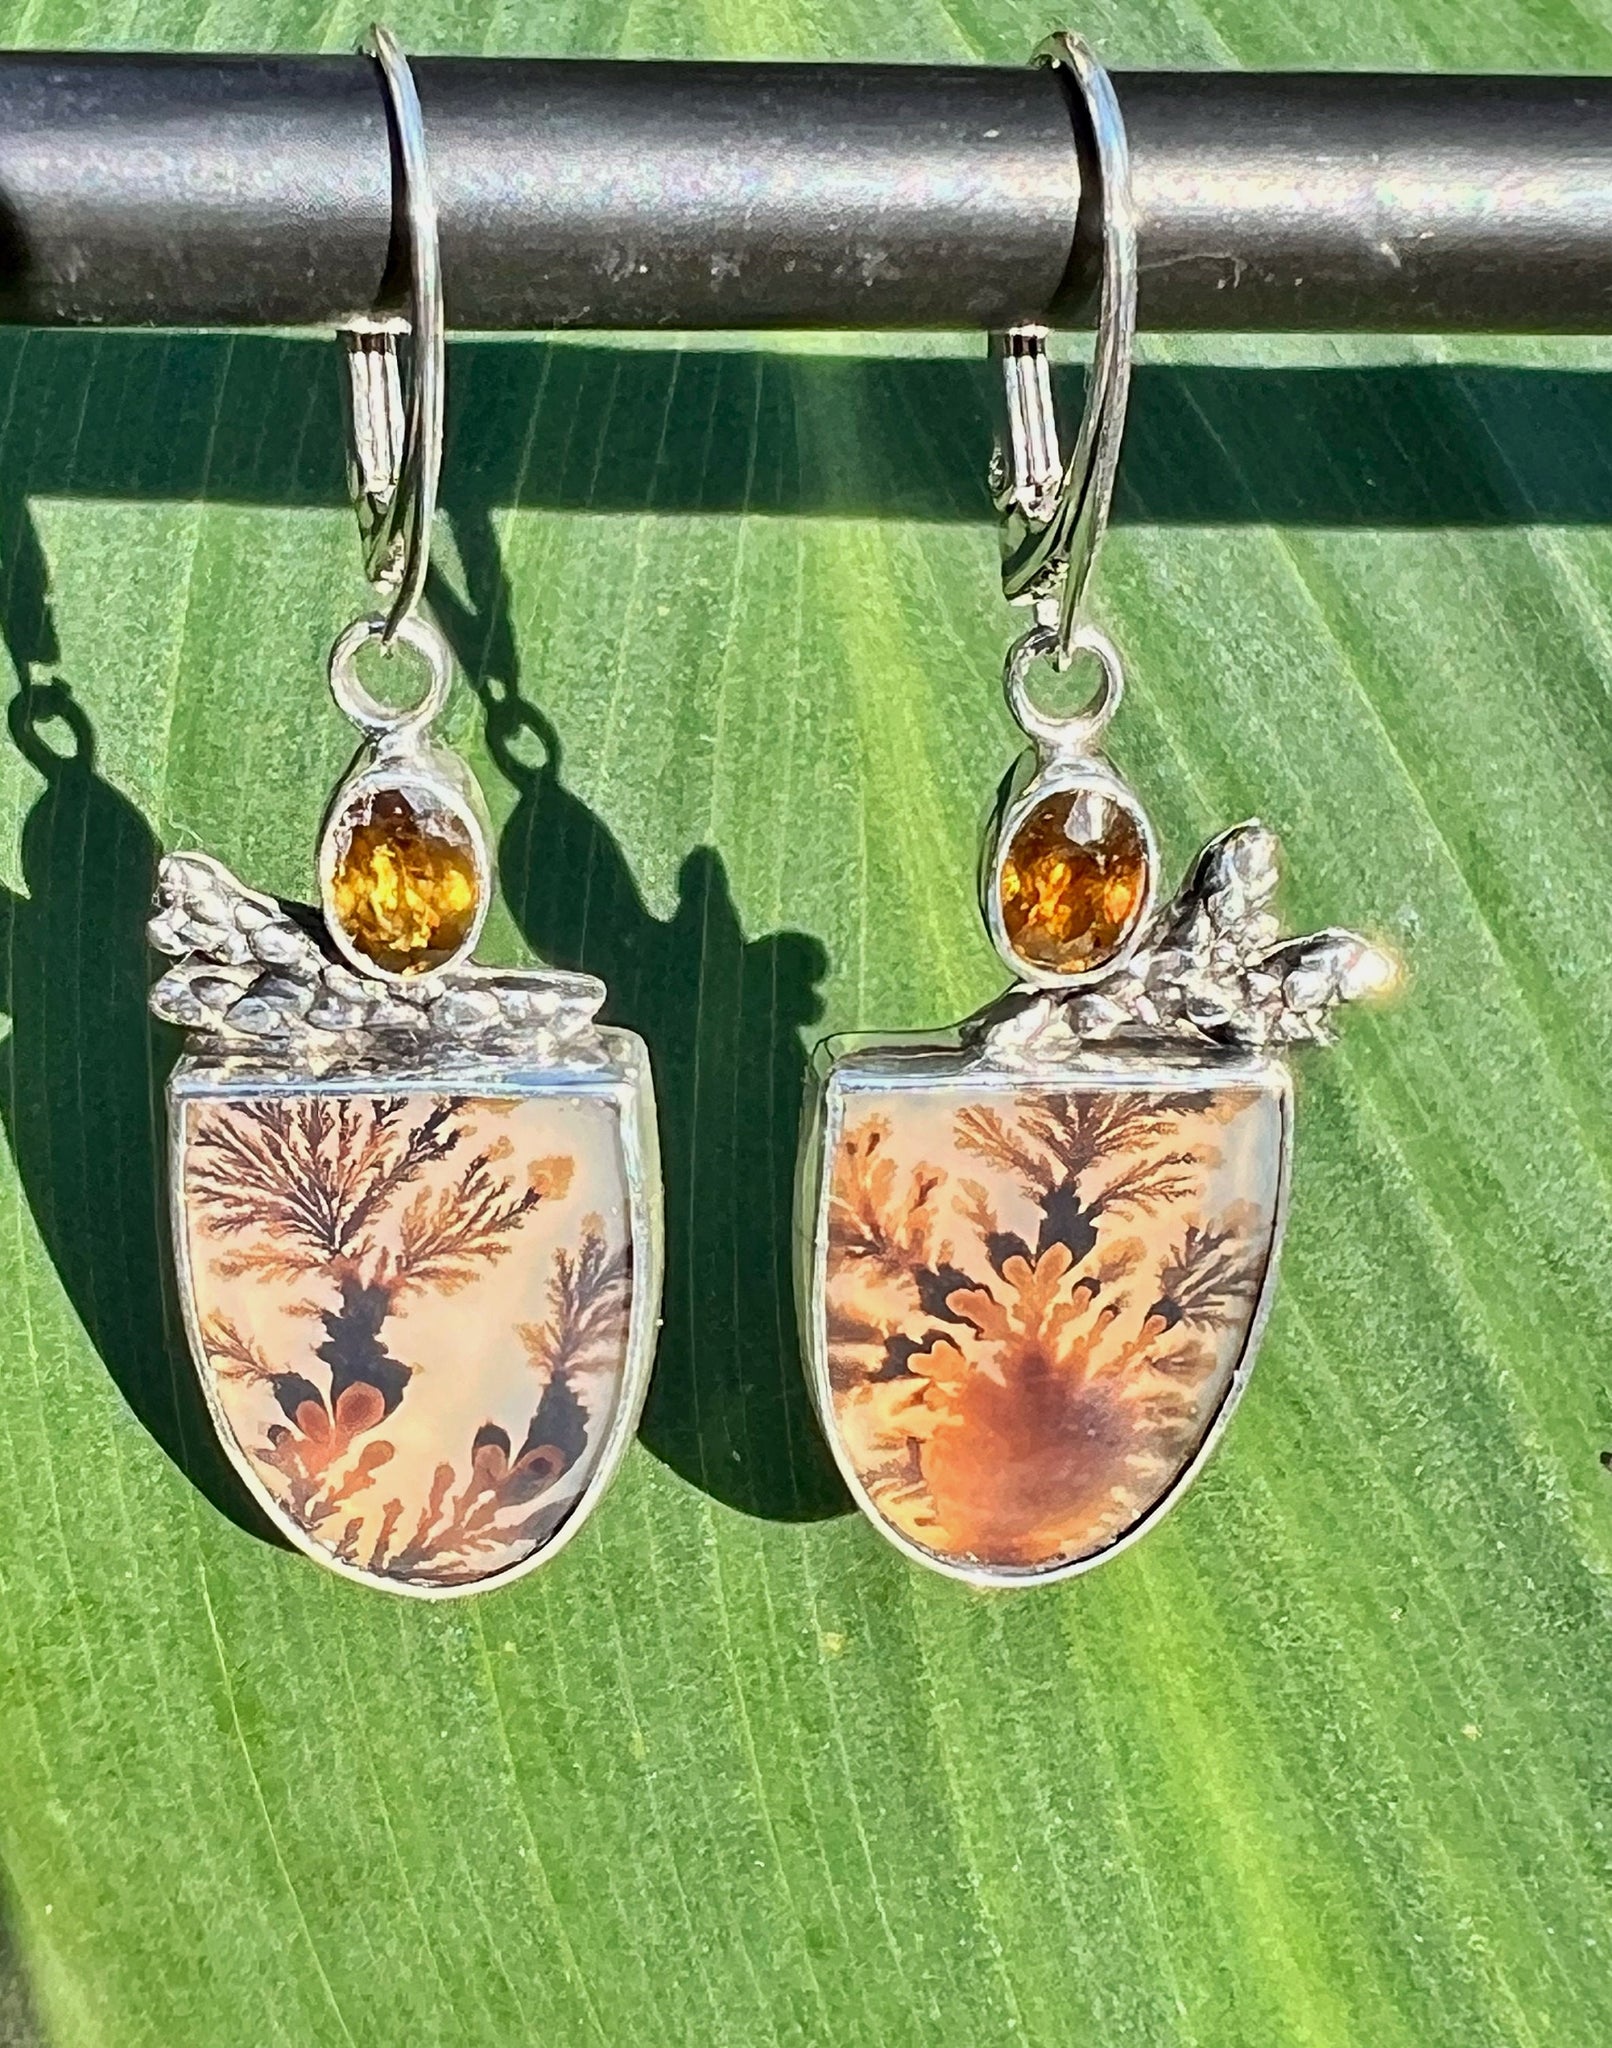 Dendritic Agate Earrings In Sterling Silver with Faceted Sphene, Unique Gemstone Earrings